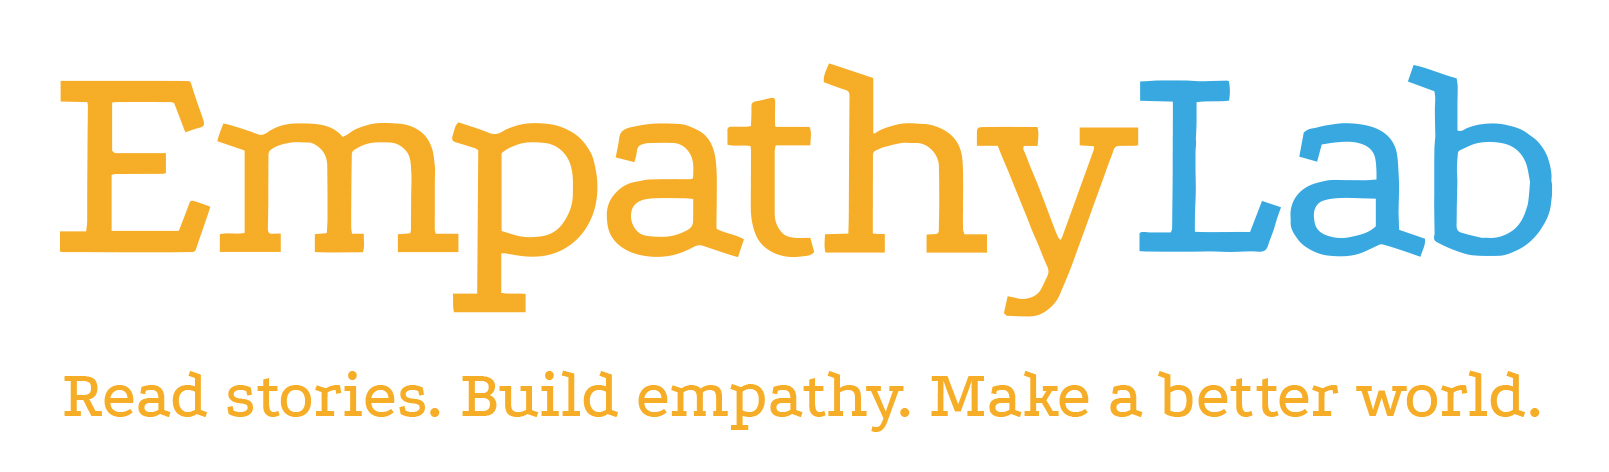 Primary Read for Empathy mini collection 2021